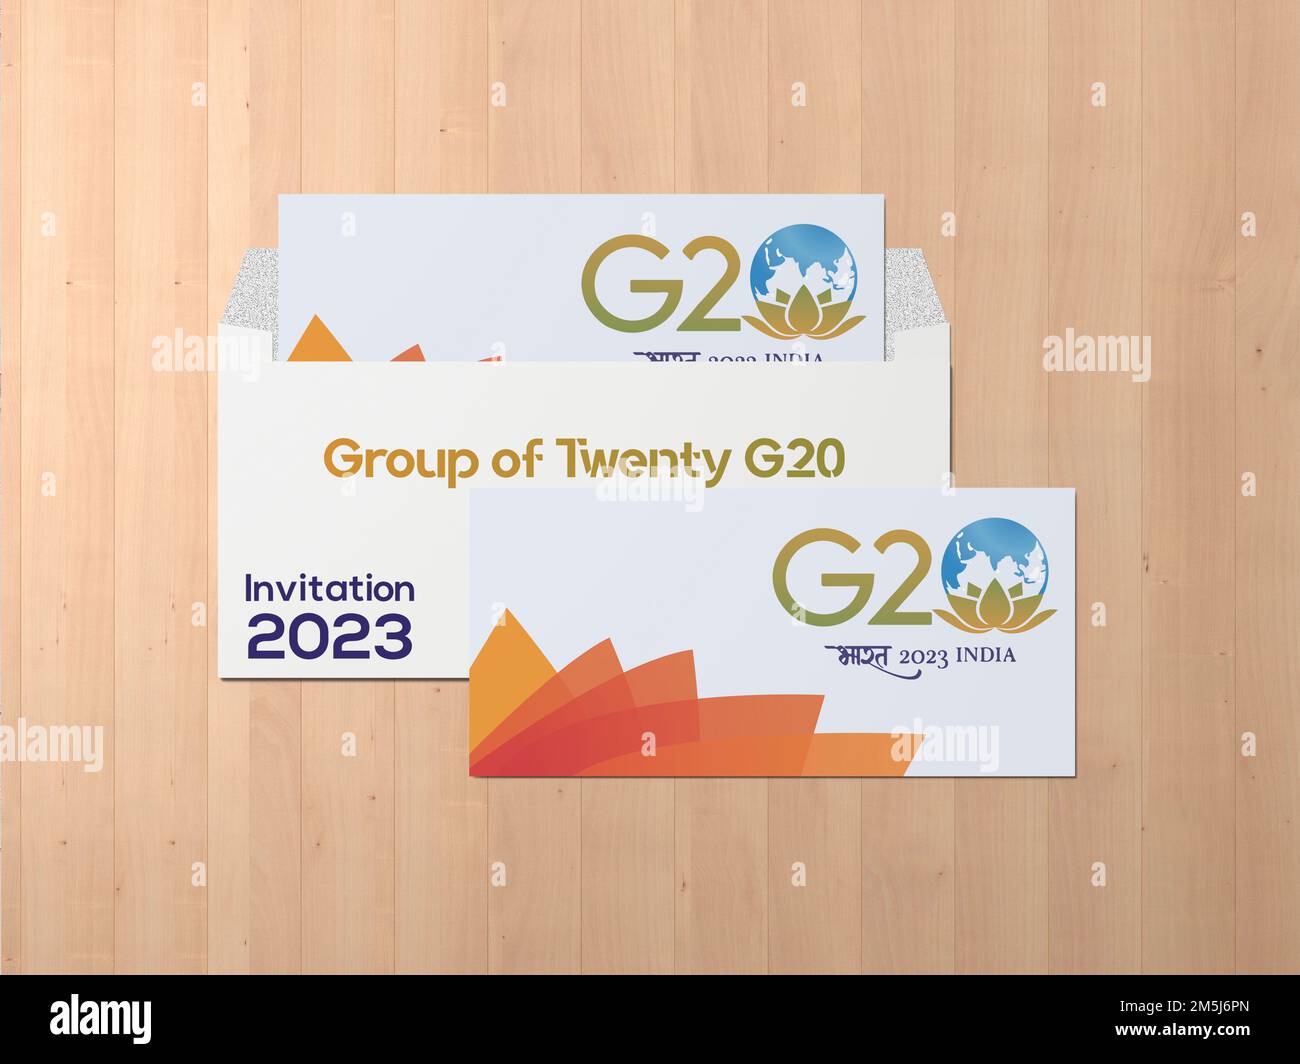 Invitation in G20 summit 2023 in India, Invitation with Official India's G20 Logo and style, G20 summit India, G20 2023, 3d illustration and 3d work Stock Photo